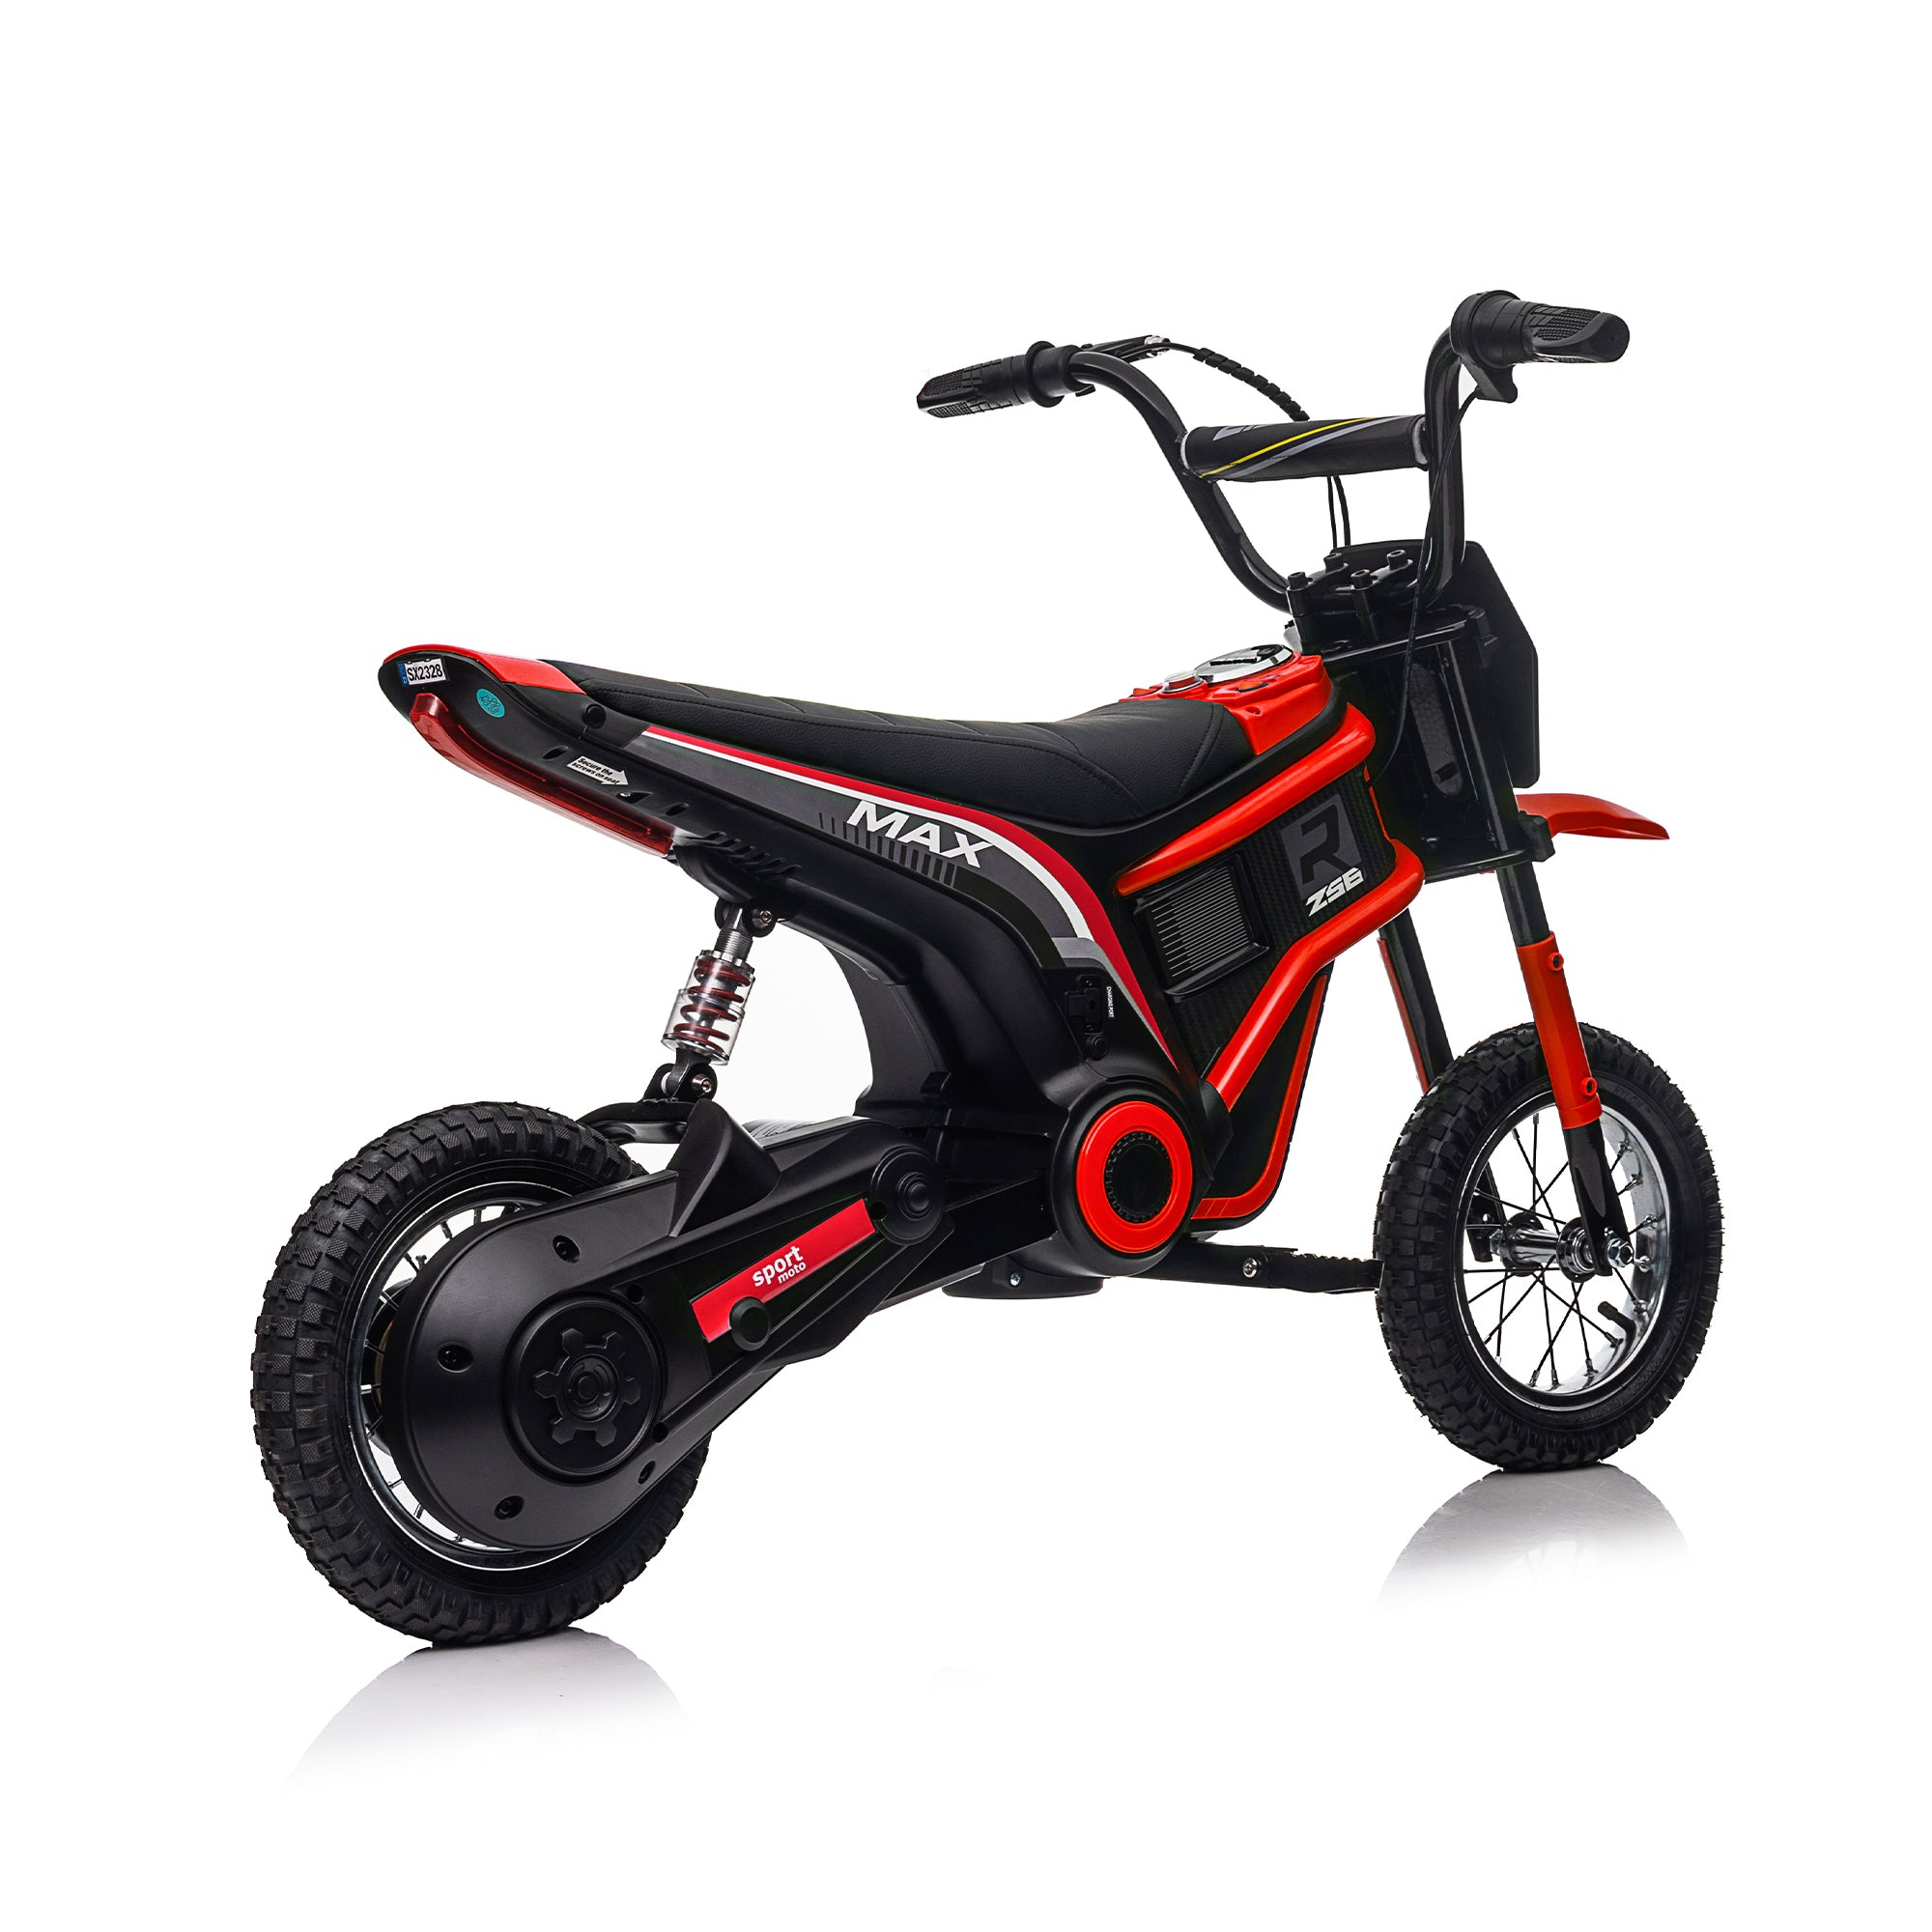 🆓🚛 24V14Ah Kids Ride On 24V Electric Toy Motocross Motorcycle Dirt Bike-XXL Large, Speeds Up To 14.29MPH, Dual Suspension, Hand-Operated Dual Brakes, Twist Grip Throttle, Authentic Motocross Bike Geometry, Red